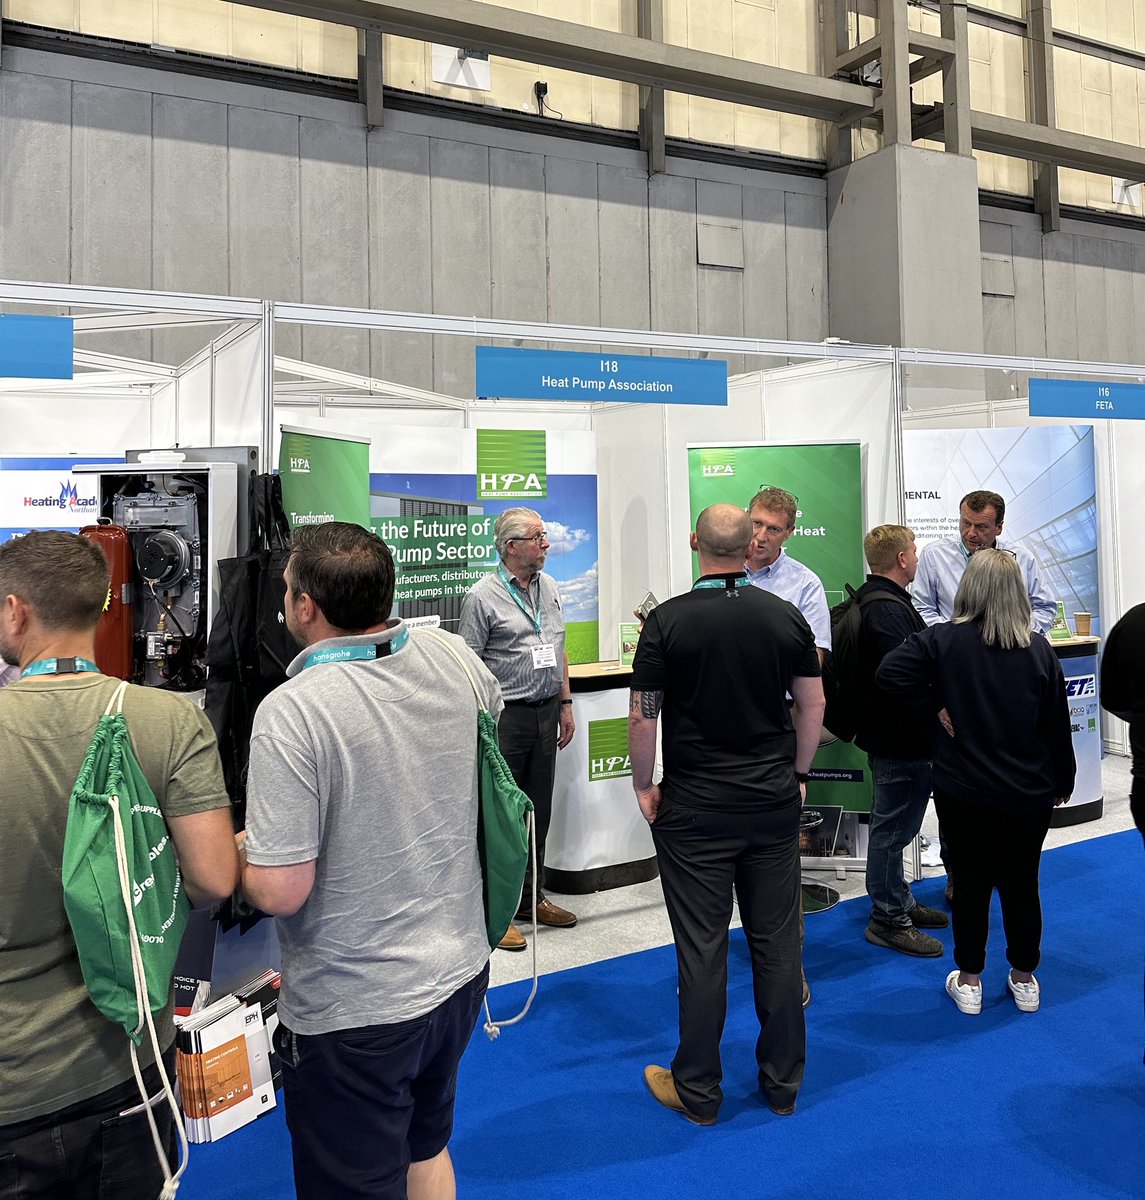 Discuss all things heat pumps at stand I18. Come and say hello! 👋

#InstallerSHOW2023 #HeatPumps #HeatingInstallers @Installer_Show